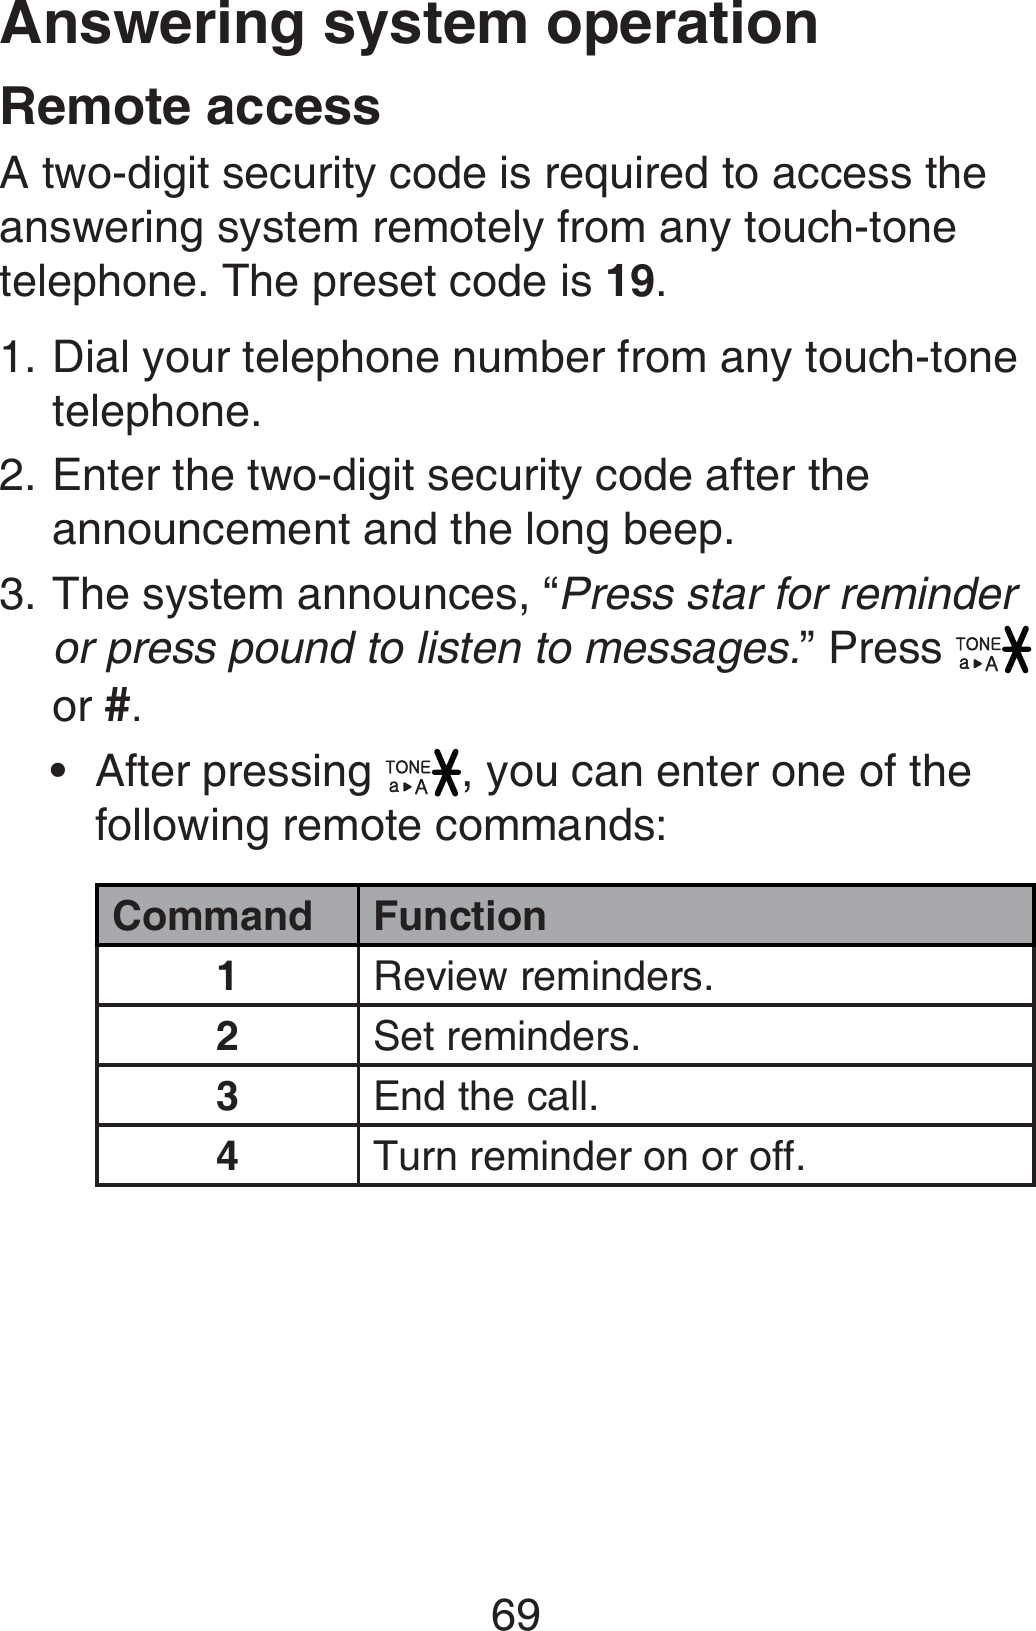 69Answering system operationRemote accessA two-digit security code is required to access the answering system remotely from any touch-tone telephone. The preset code is 19. Dial your telephone number from any touch-tone telephone.Enter the two-digit security code after the announcement and the long beep.The system announces, “Press star for reminder or press pound to listen to messages.” Press   or #.After pressing  , you can enter one of the following remote commands:Command Function1Review reminders.2Set reminders.3End the call.4Turn reminder on or off.1.2.3.•